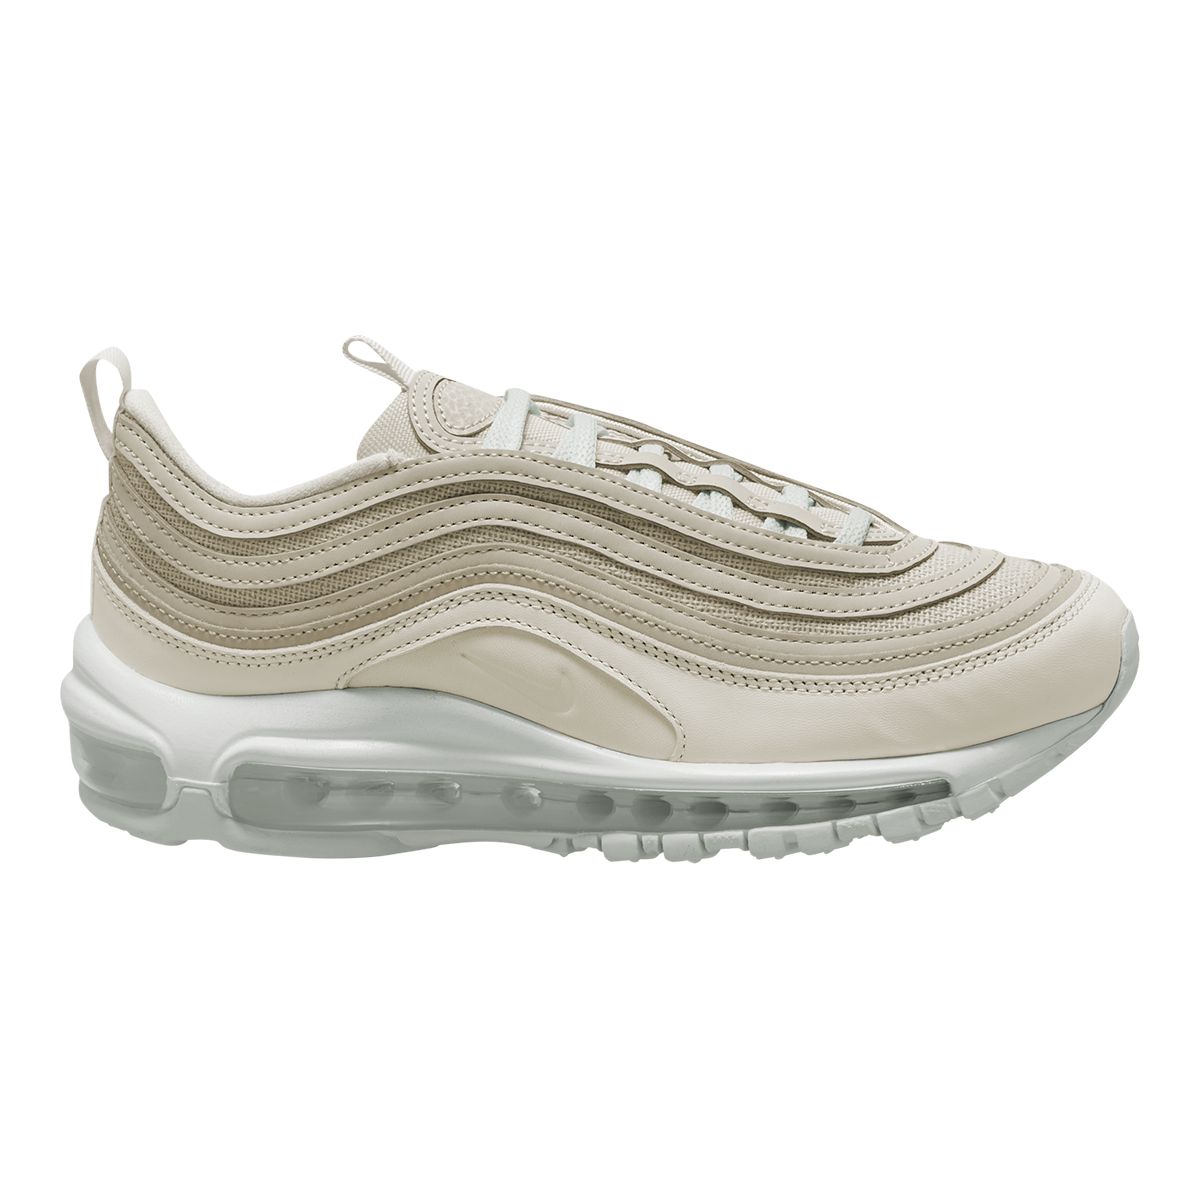 Nike Women's Air Max 97 Shoes  Sneakers Running Cushioned